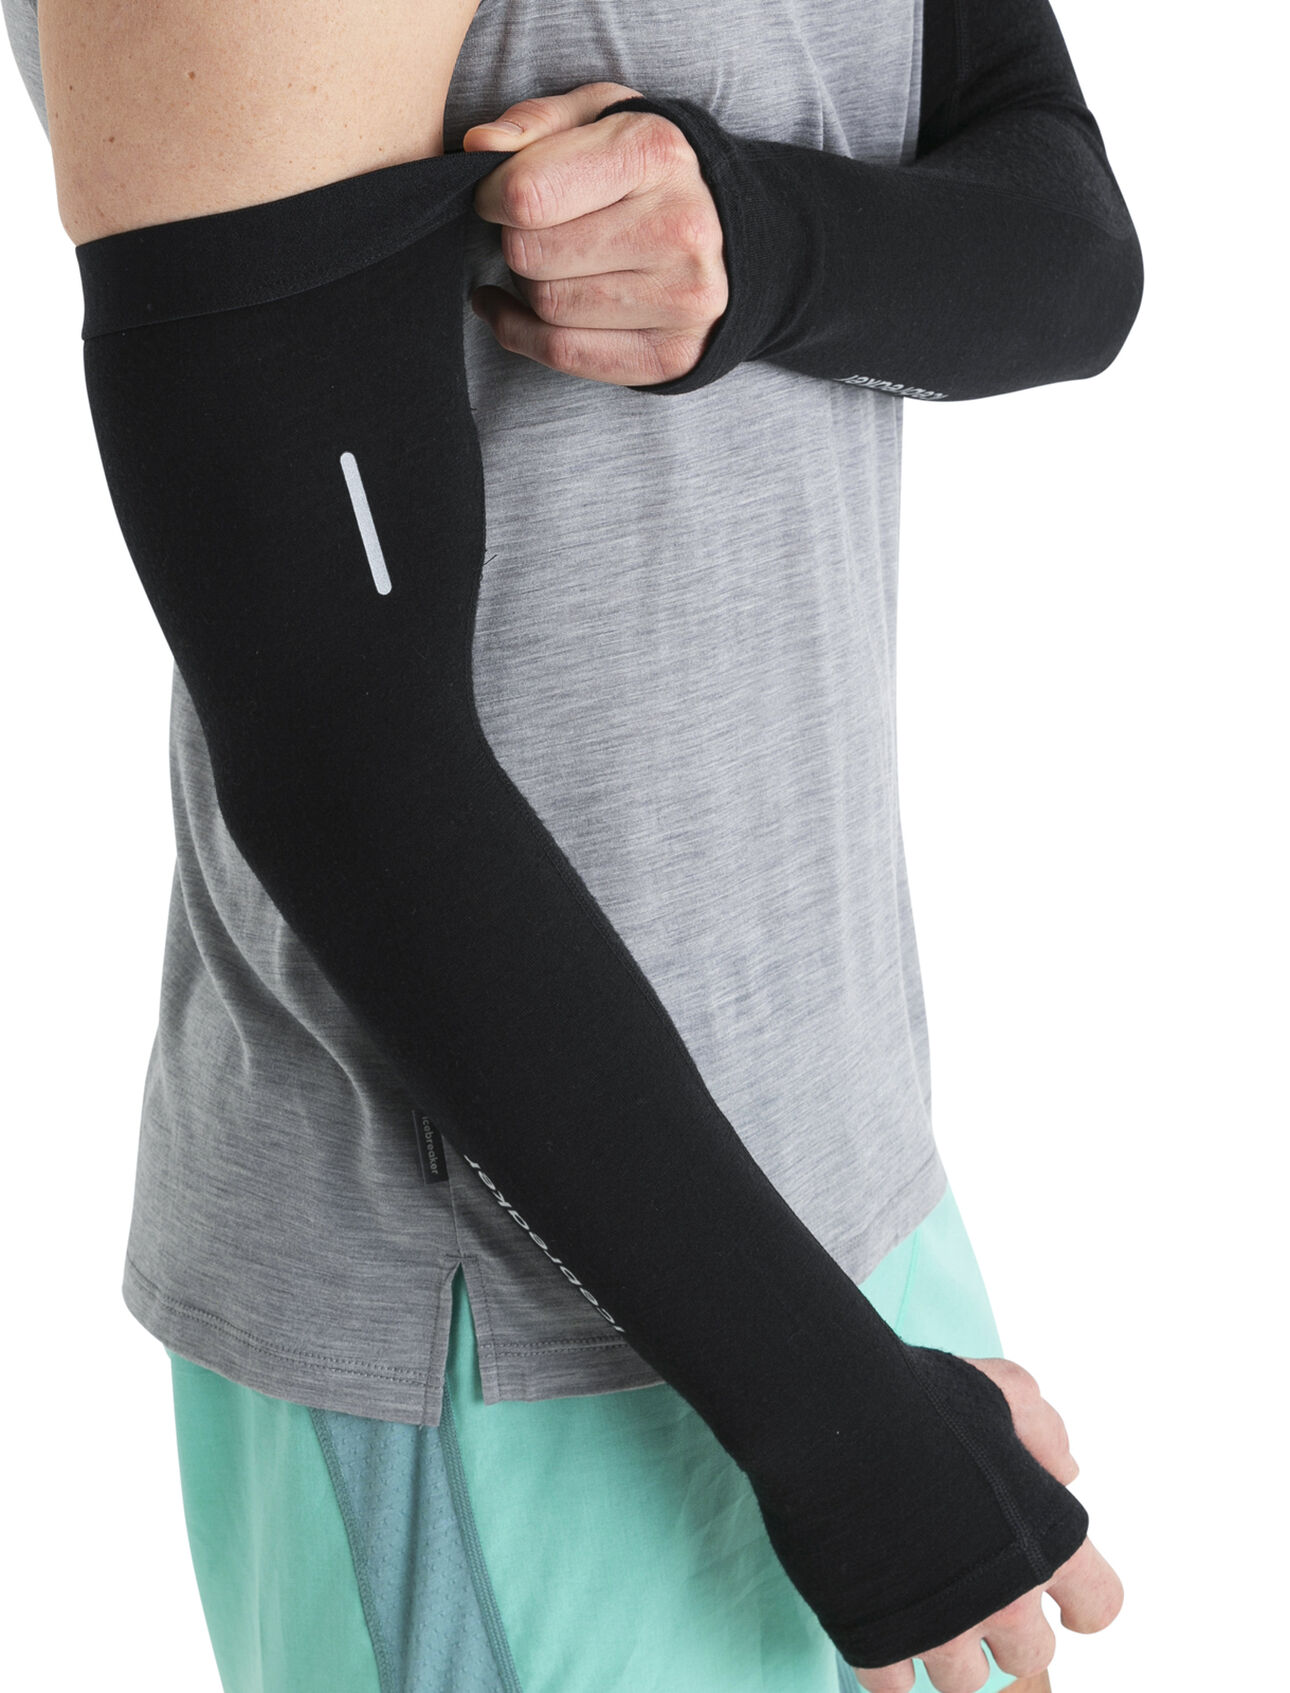 Unisex 200 ZoneKnit™ Merino Arm Sleeves Simple, stretchy and versatile arm sleeves ideal for breathable warmth and light compression on runs and other fast-paced pursuits, the Merino 200 ZoneKnit™ Arm Sleeves feature 100% merino wool jersey fabric with strategic mesh panels for ventilation.